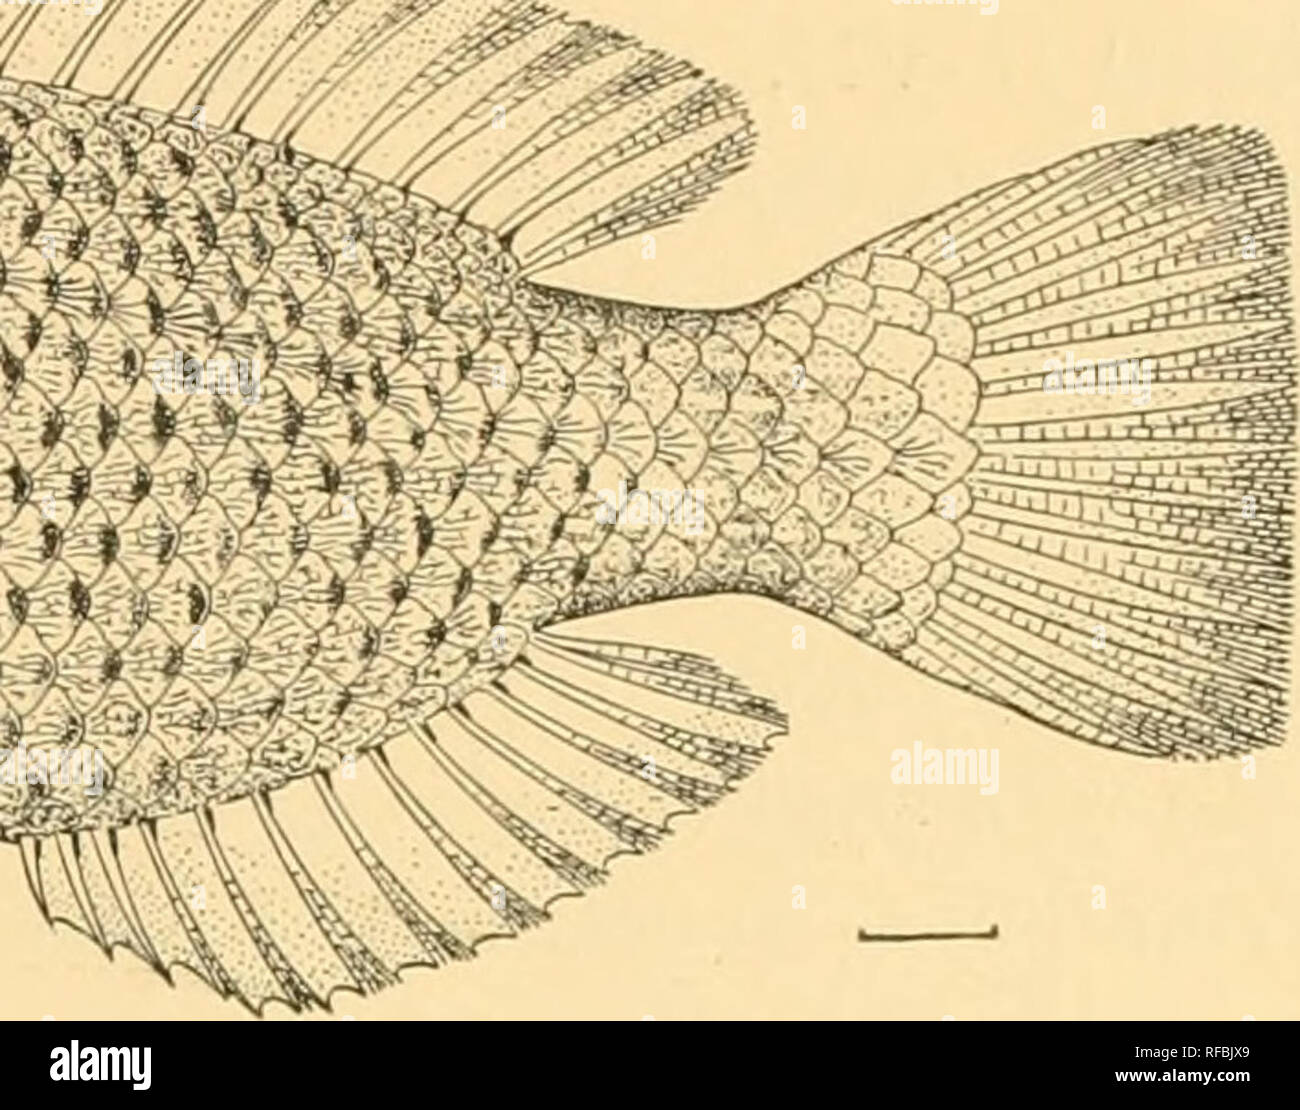 . A catalog of the fishes of Formosa. Fishes. Fig. 21. Choirodon nyctemblema J. &amp; E. (After Jordan &amp; Evermann, Proc. U. S. N. M., Vol. 25, p. 353.) 223. Duymaeria flagellifera (Cuvier &amp; Valenciennes). Keerun (Jordan &amp; Evermann). 224. Anampses cseruleopunctatus (Ruppell). Formosa (Jordan &amp; Evermann). 225. Halichceres dussumieri (Cuvier &amp; Valenciennes) = Halichceres nigrescens Bleeker. One specimen, Takao, three and one-half inches long. 226. Hemipteronotus verrens Jordan &amp; Evermann. Keerun (Jordan &amp; Evermann). â. Please note that these images are extracted from s Stock Photo